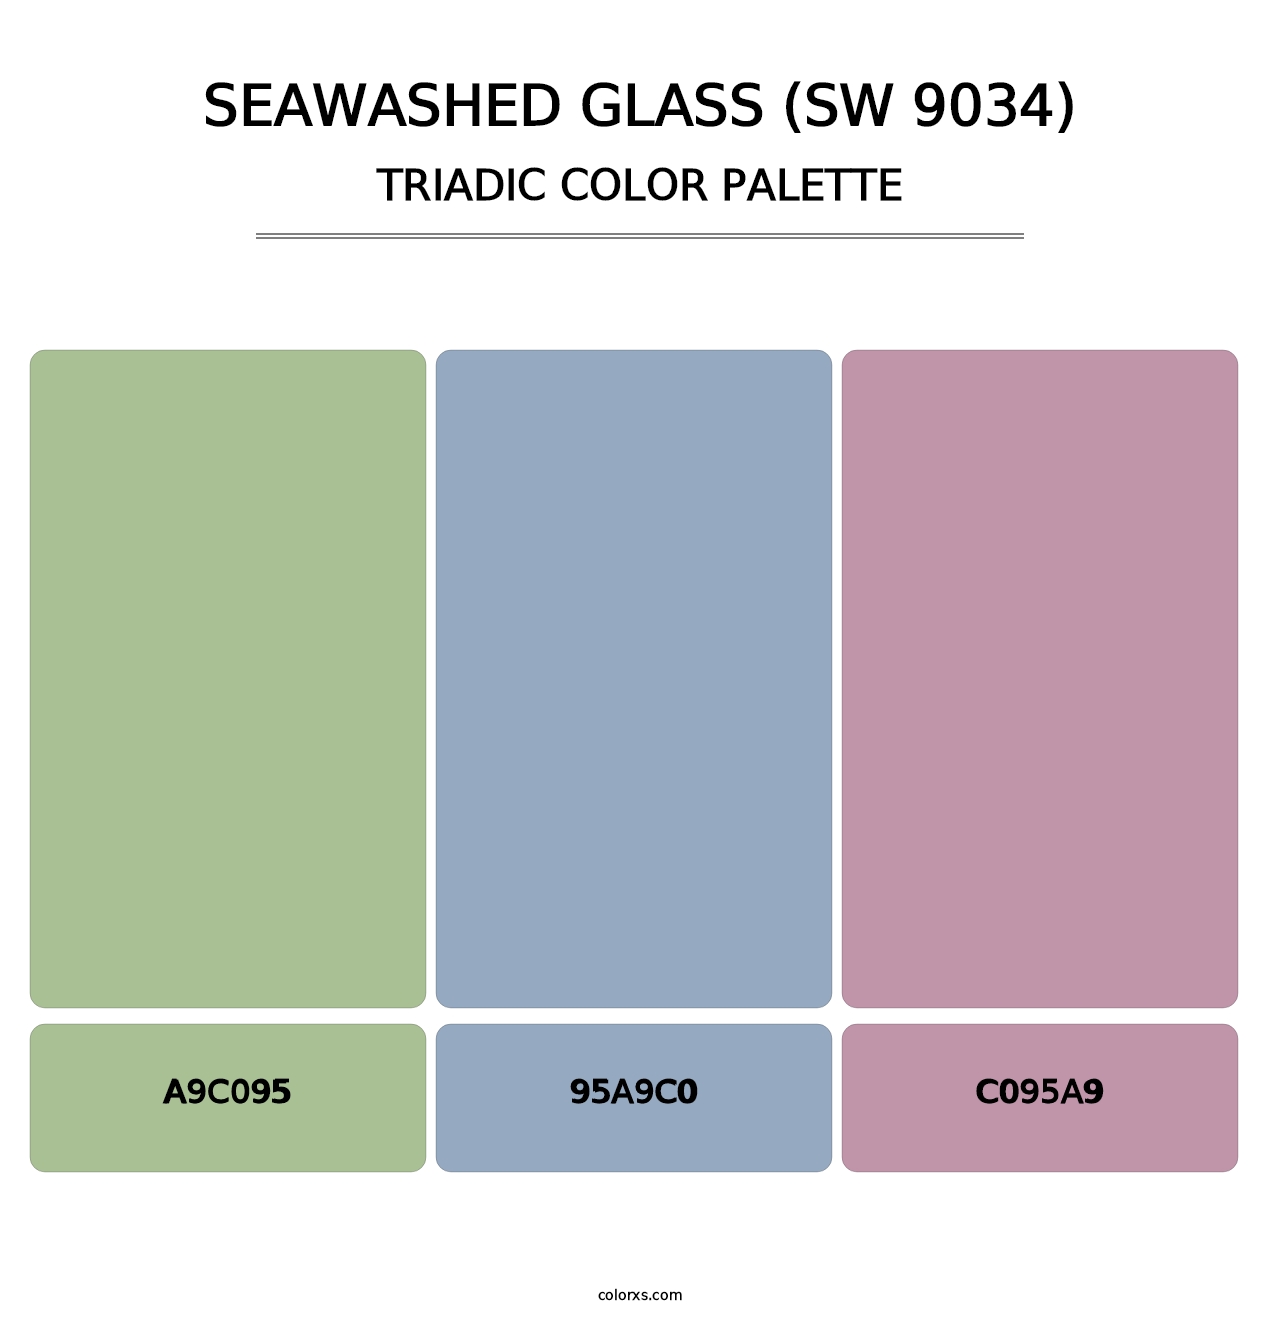 Seawashed Glass (SW 9034) - Triadic Color Palette